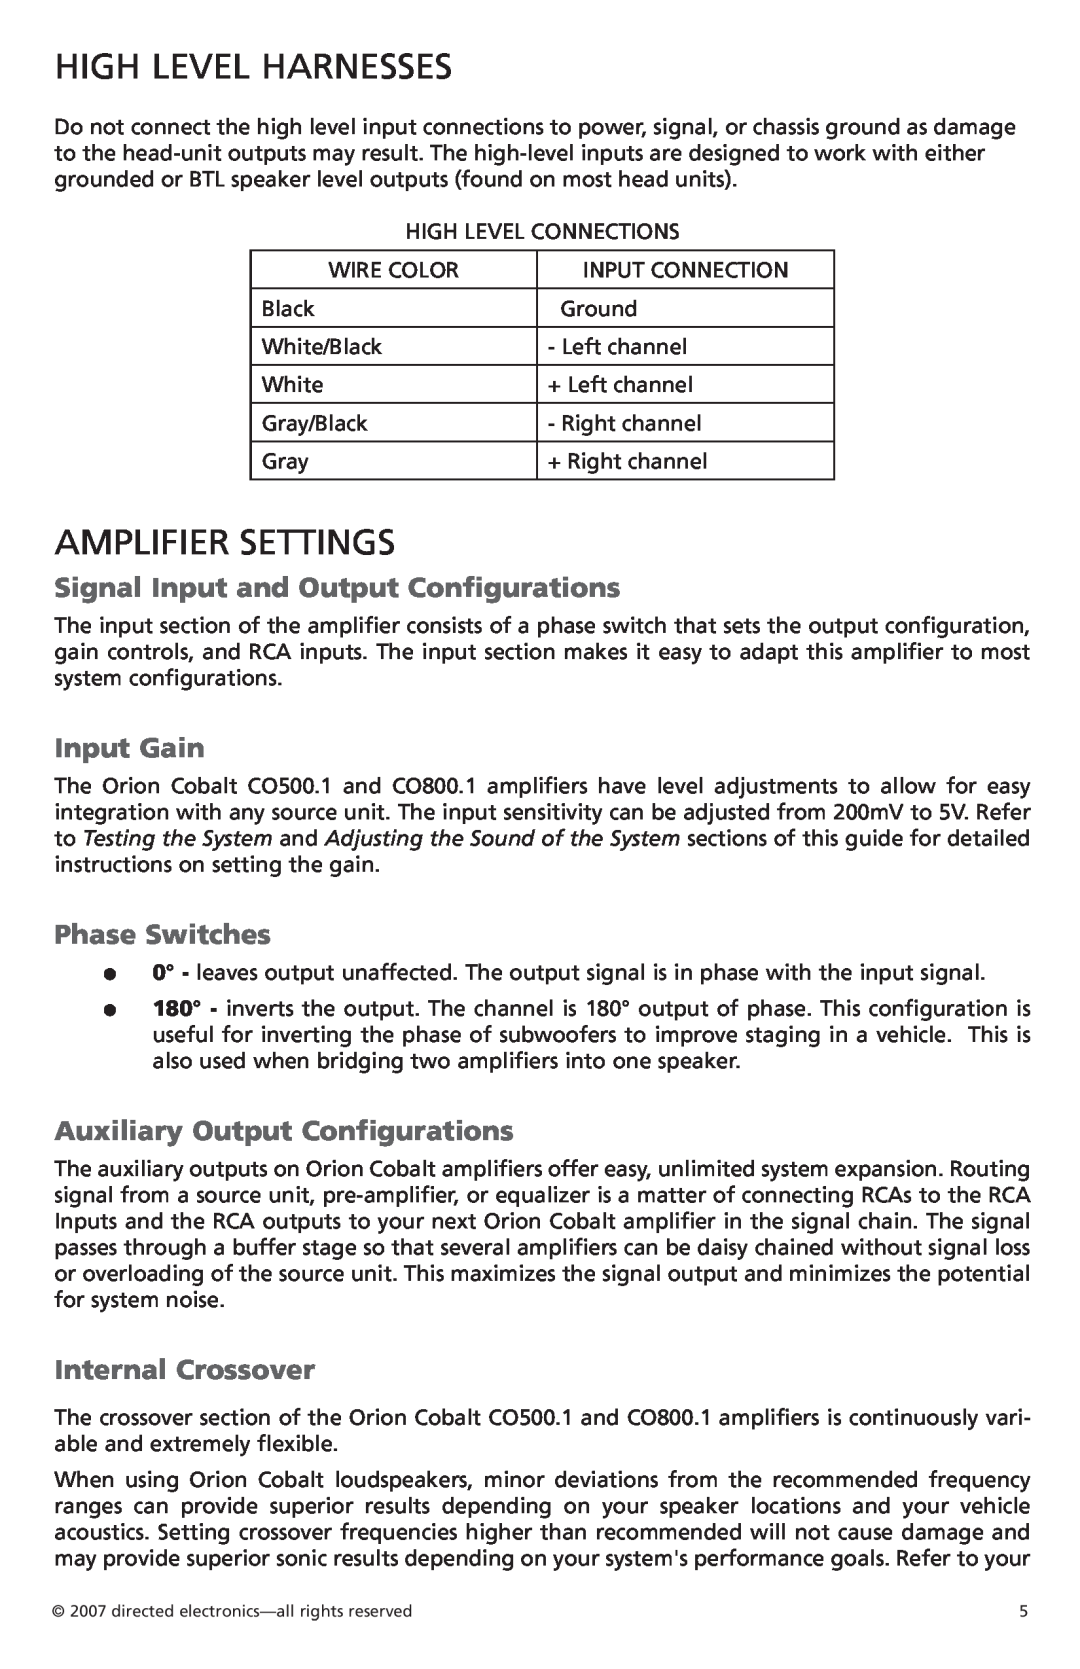 Orion Car Audio CO800.1 High Level Harnesses, Amplifier Settings, Signal Input and Output Configurations, Input Gain 